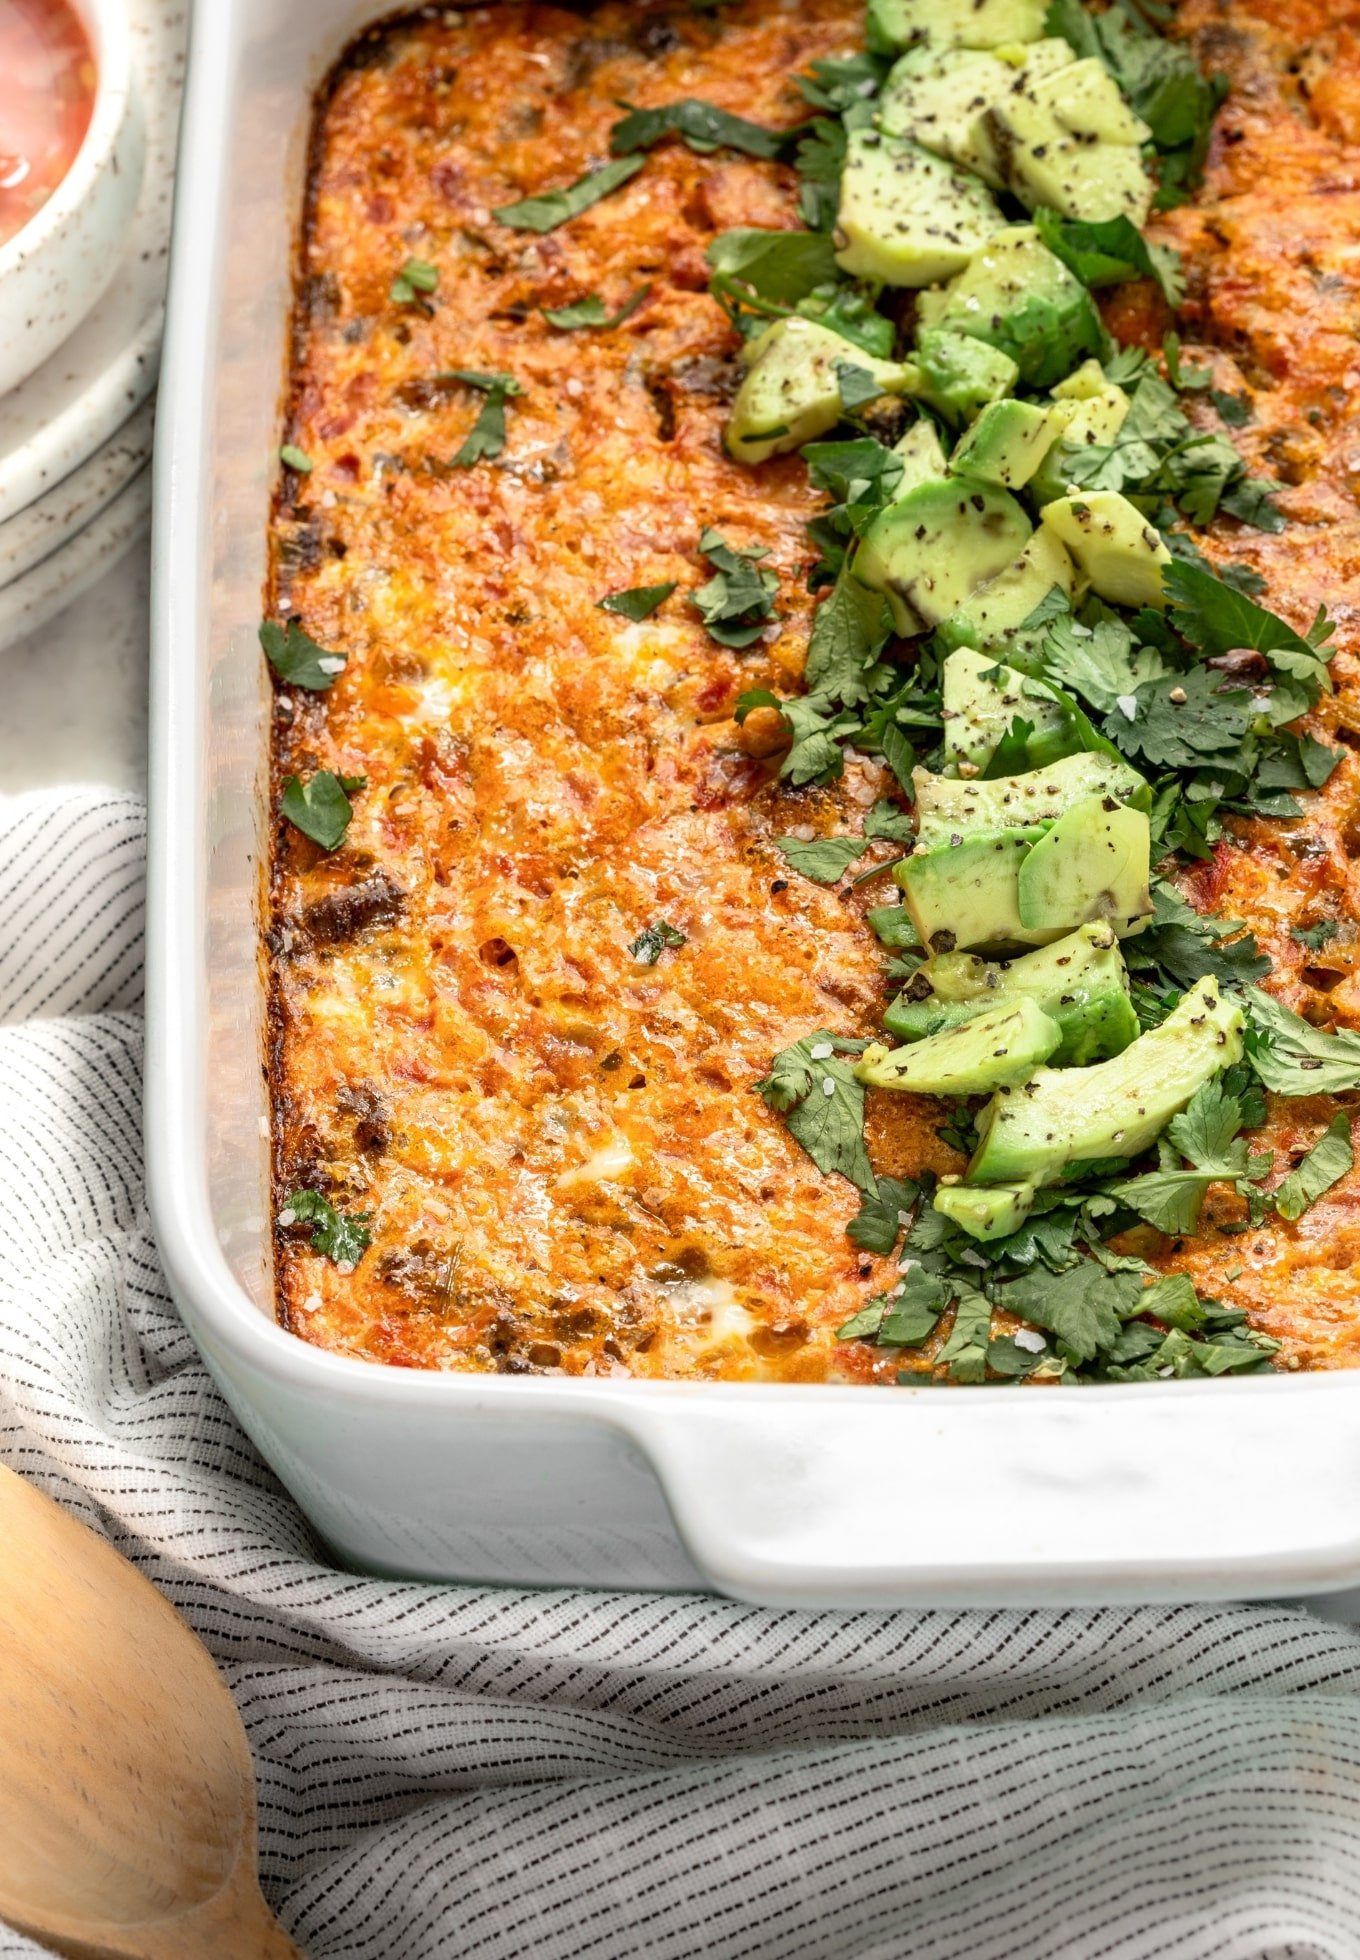 https://thewholecook.com/wp-content/uploads/2021/02/Dairy-Free-Taco-Breakfast-Casserole-by-The-Whole-Cook-vertical1-1.jpg